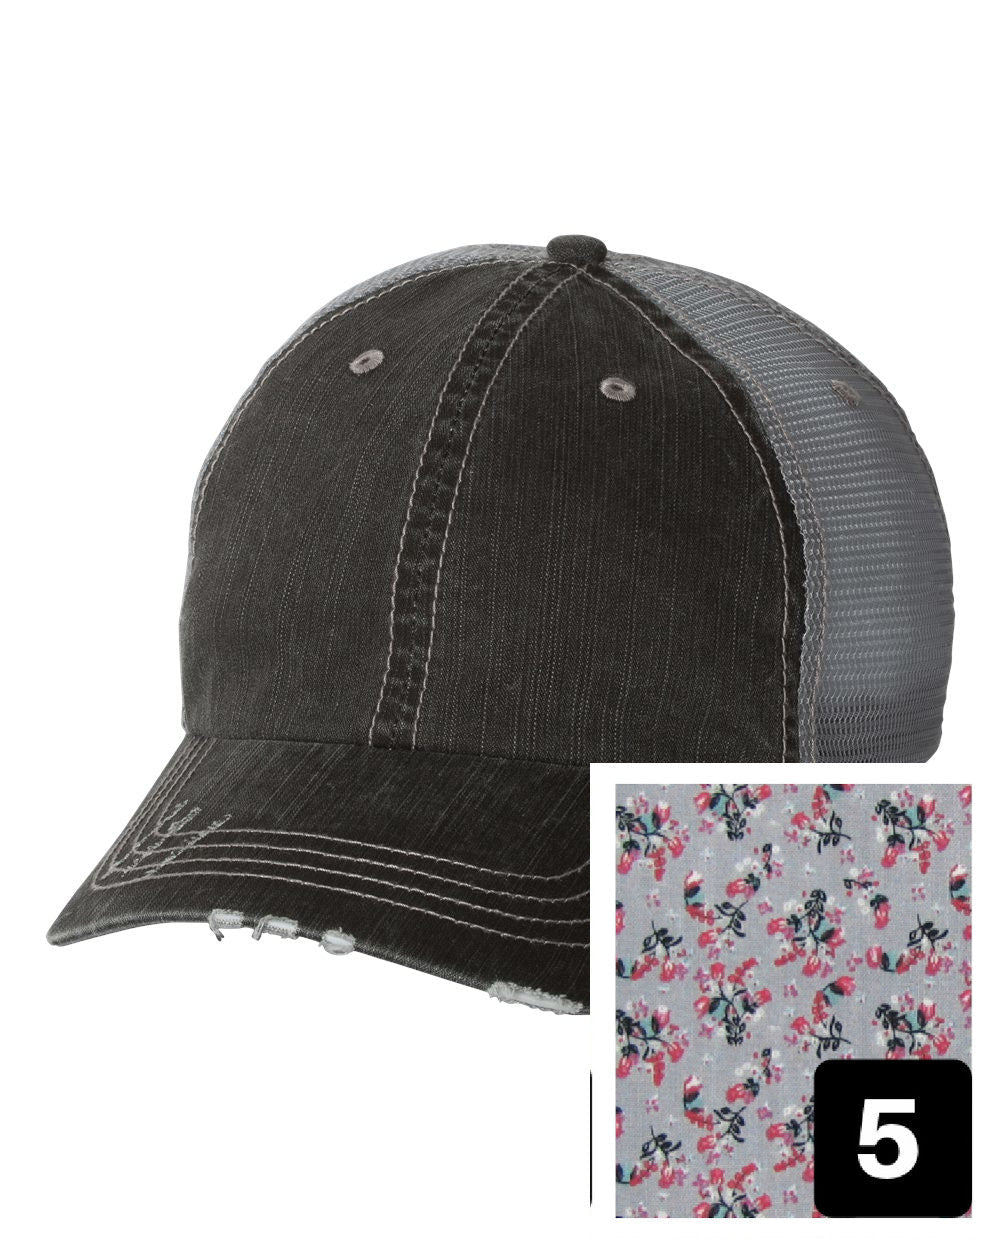 gray distressed trucker hat with purple and pink floral fabric state of Wyoming